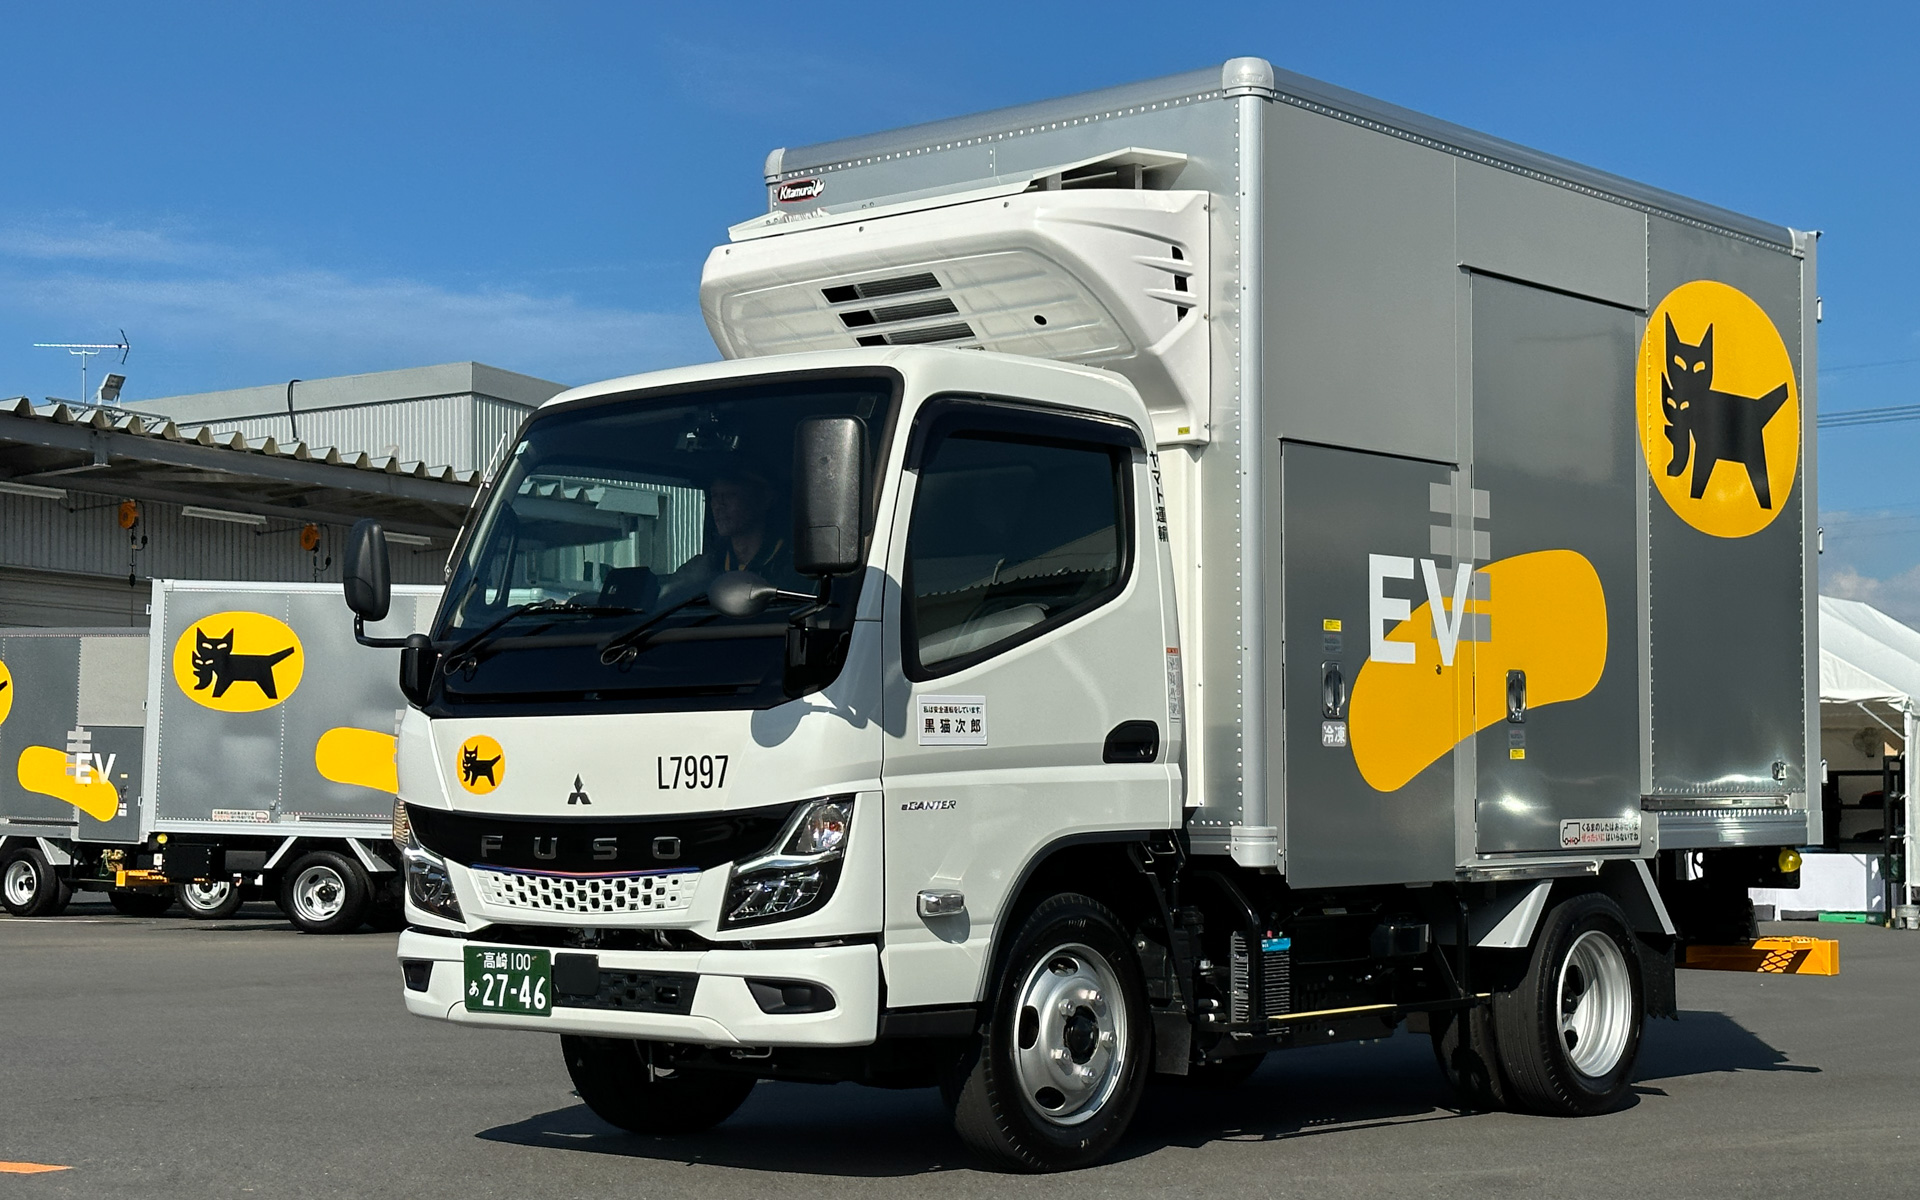 Yamato Transport Introduces 900 New Mitsubishi Fuso e-Canter Models: Unveiling Event and Specifications